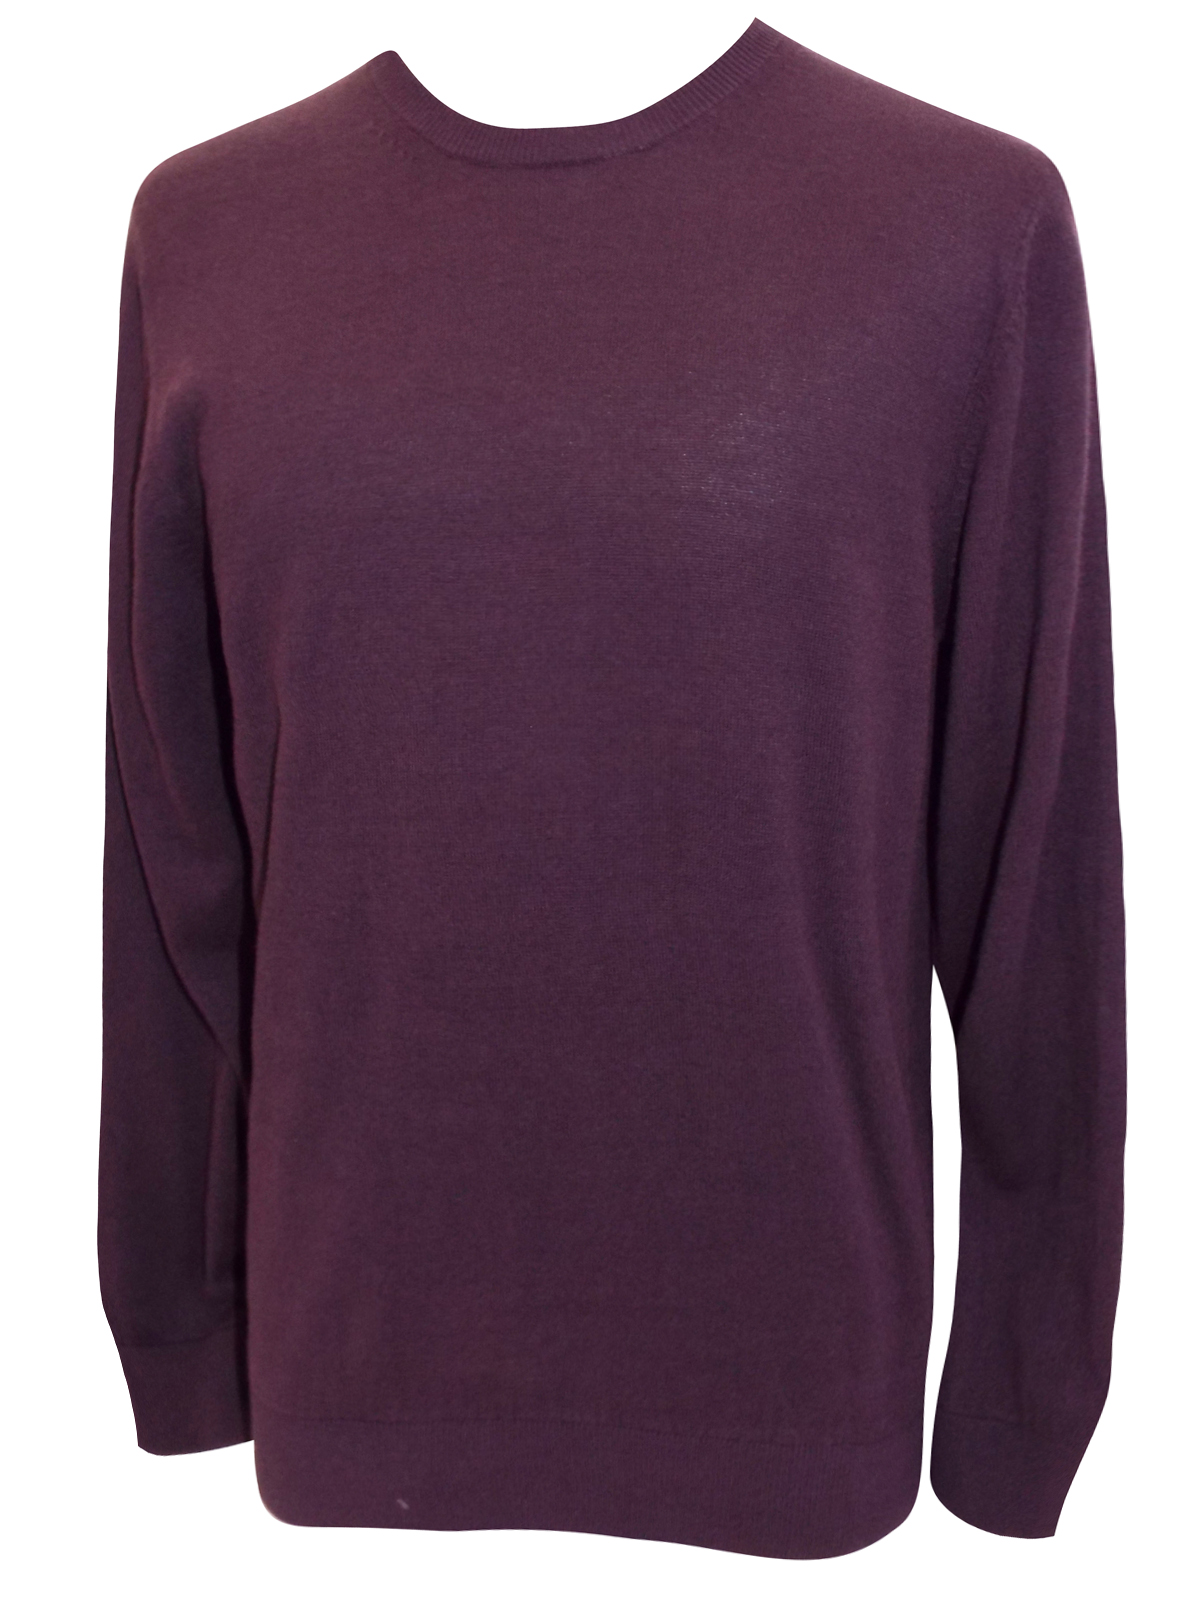 Marks and Spencer - - M&5 GRAPE Cotton Blend Long Sleeve Jumper - Size ...